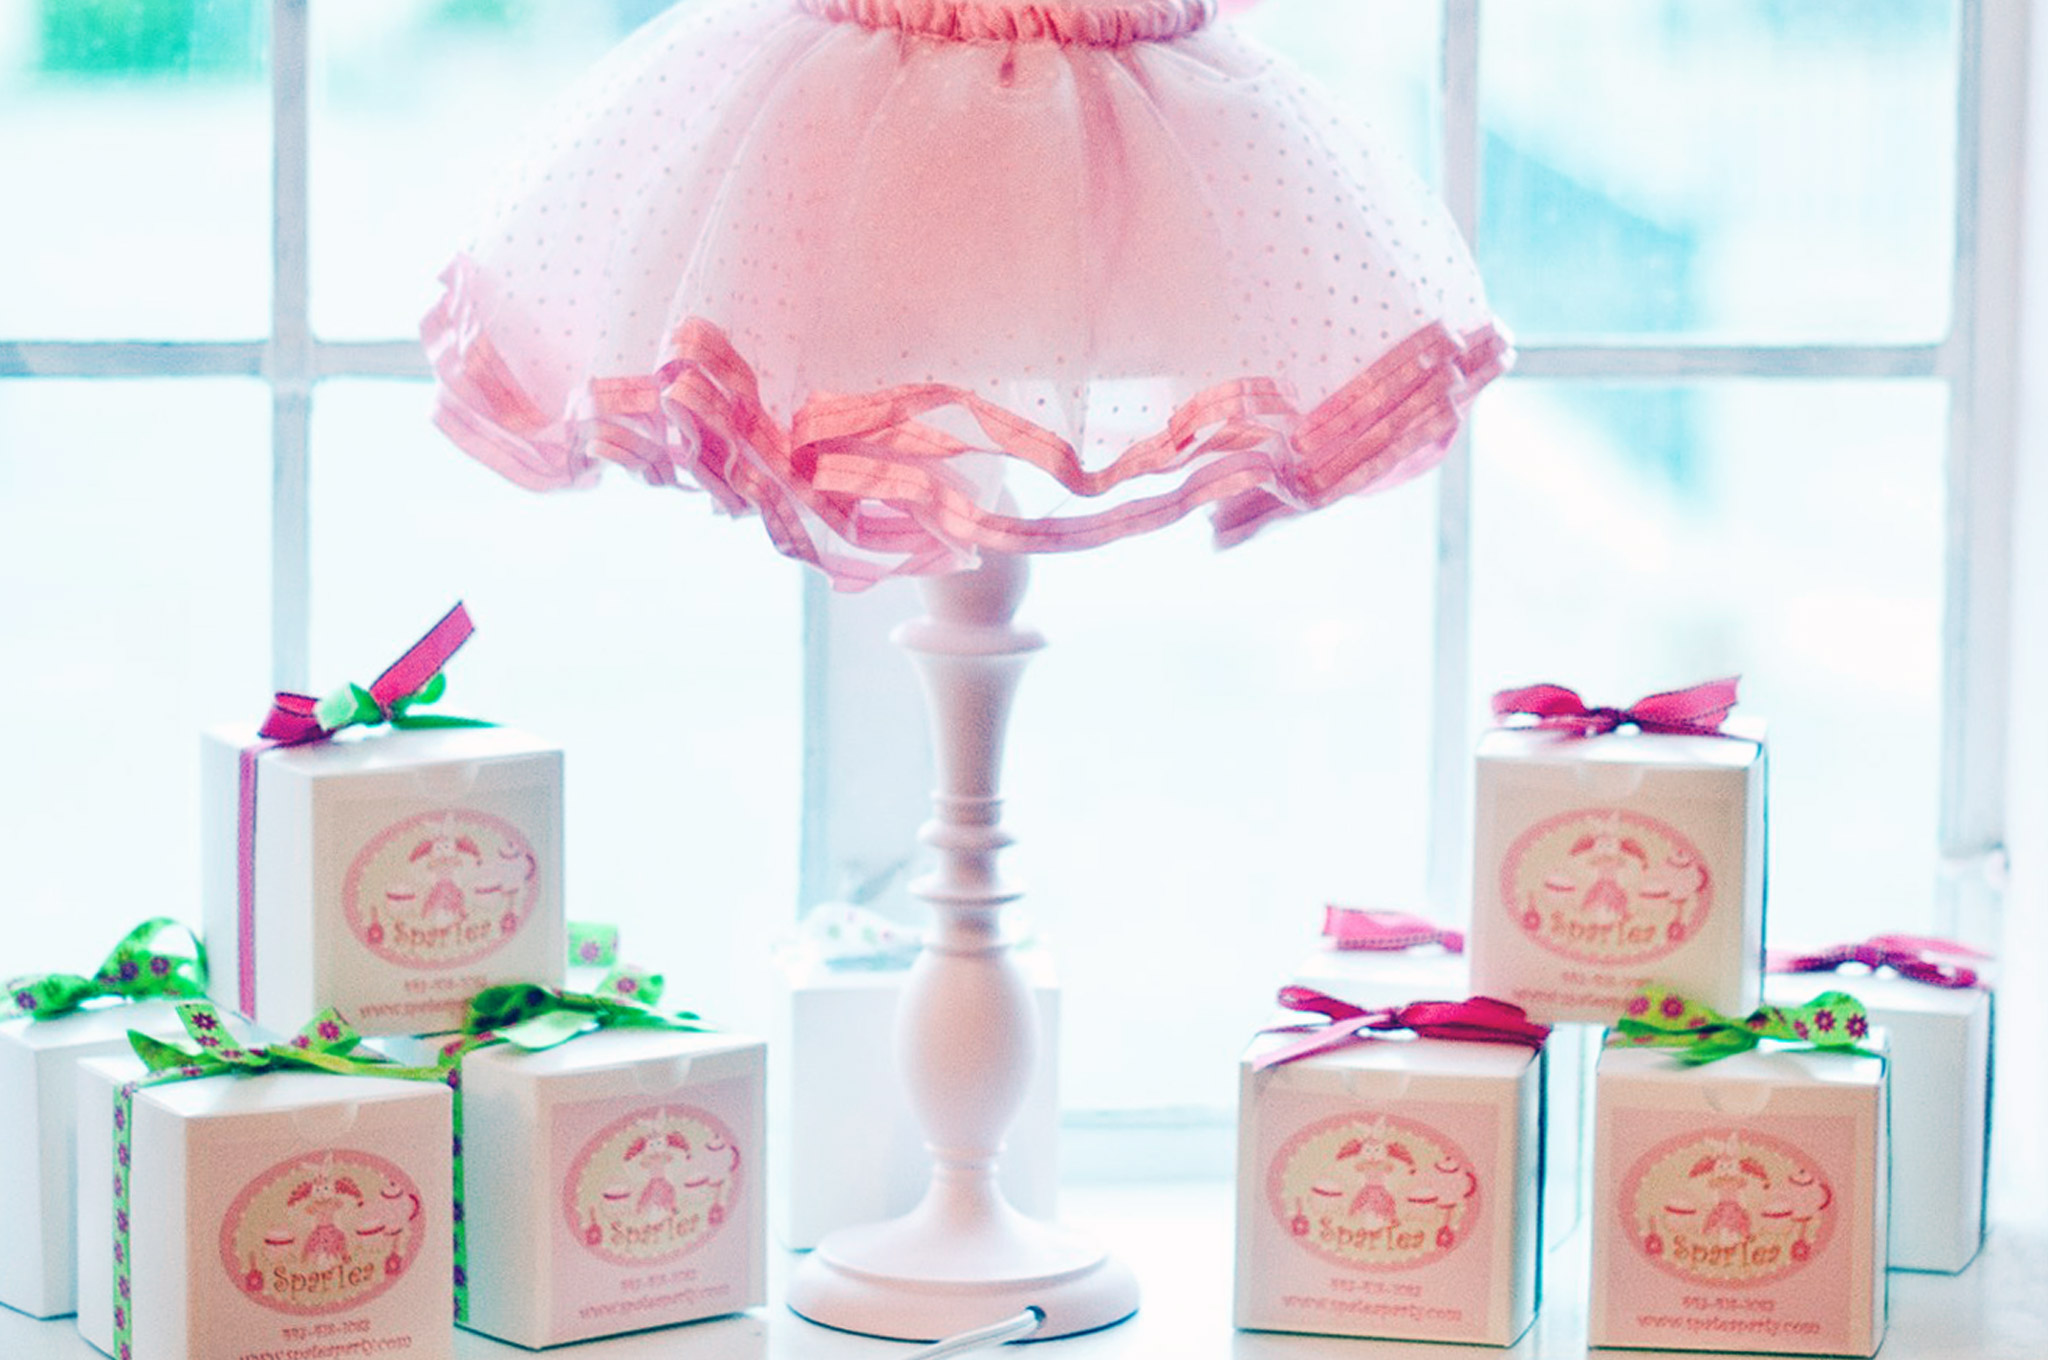 gift boxes under a lamp with a tutu looking lampshade